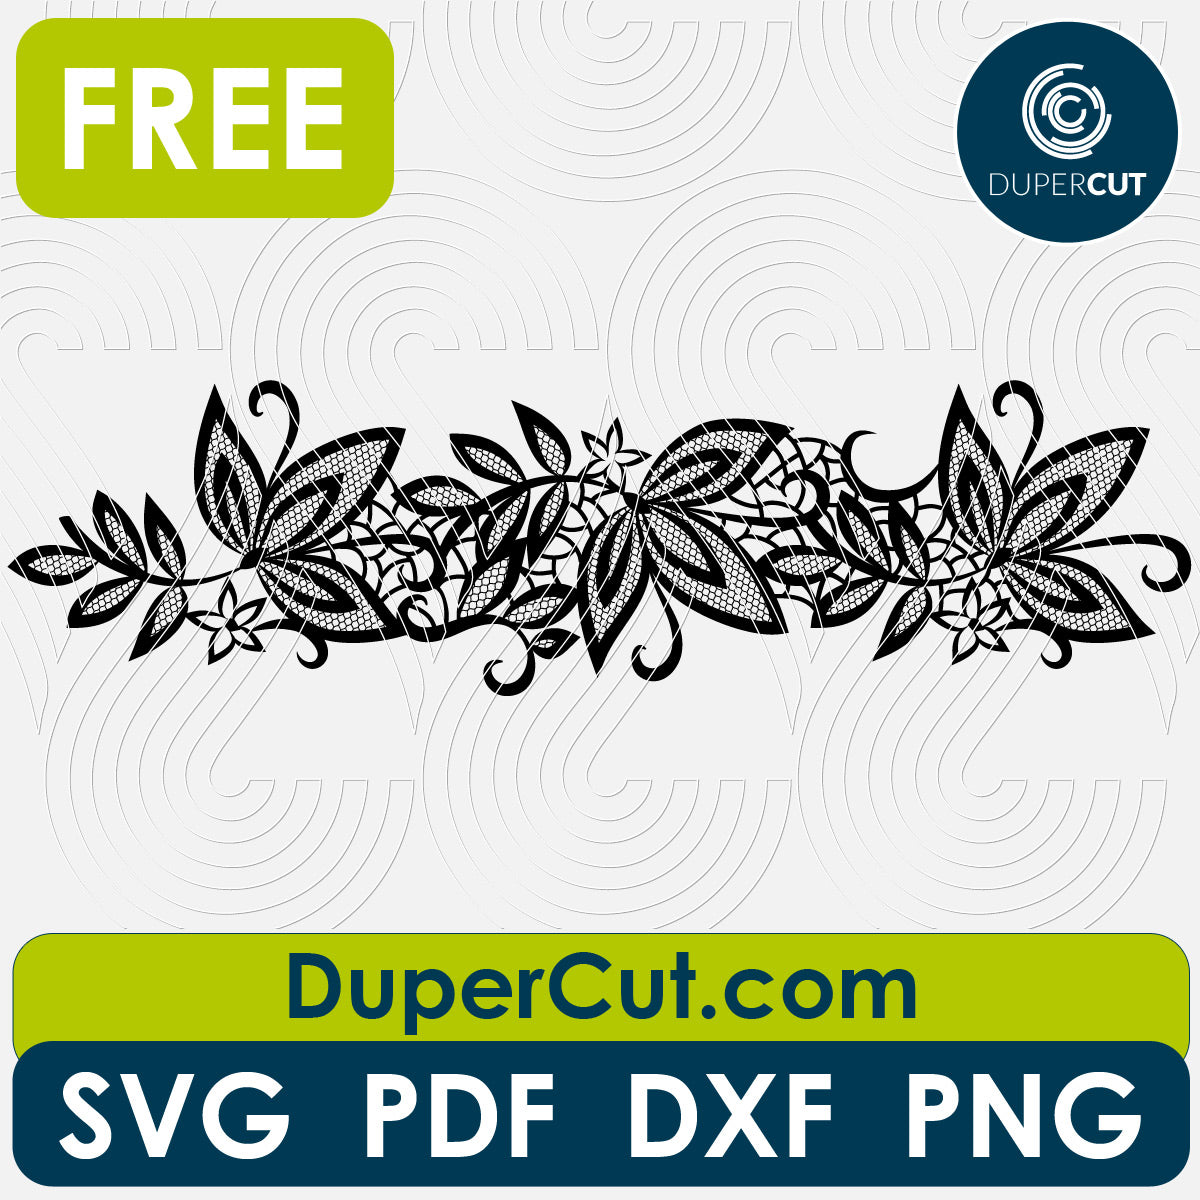 Lace border free cutting template SVG PNG DXF files for Glowforge, Cricut, Silhouette, CNC laser router by DuperCut.com